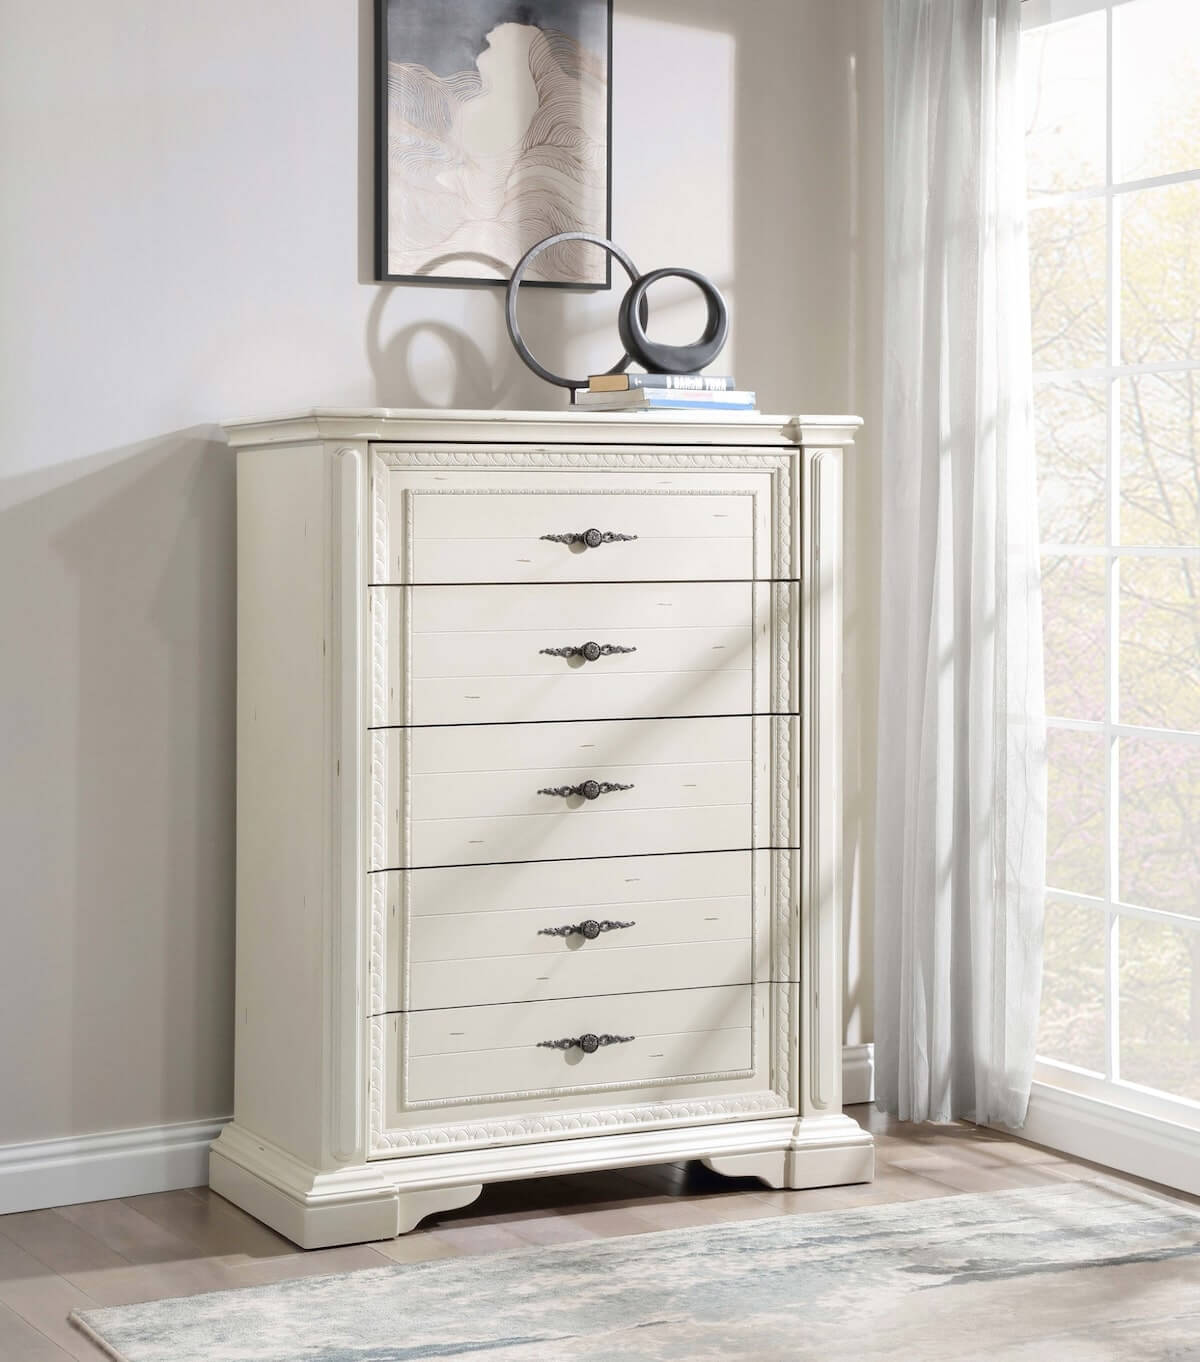 Neoclassical interior design: Evelyn 5-drawer Chest Antique White